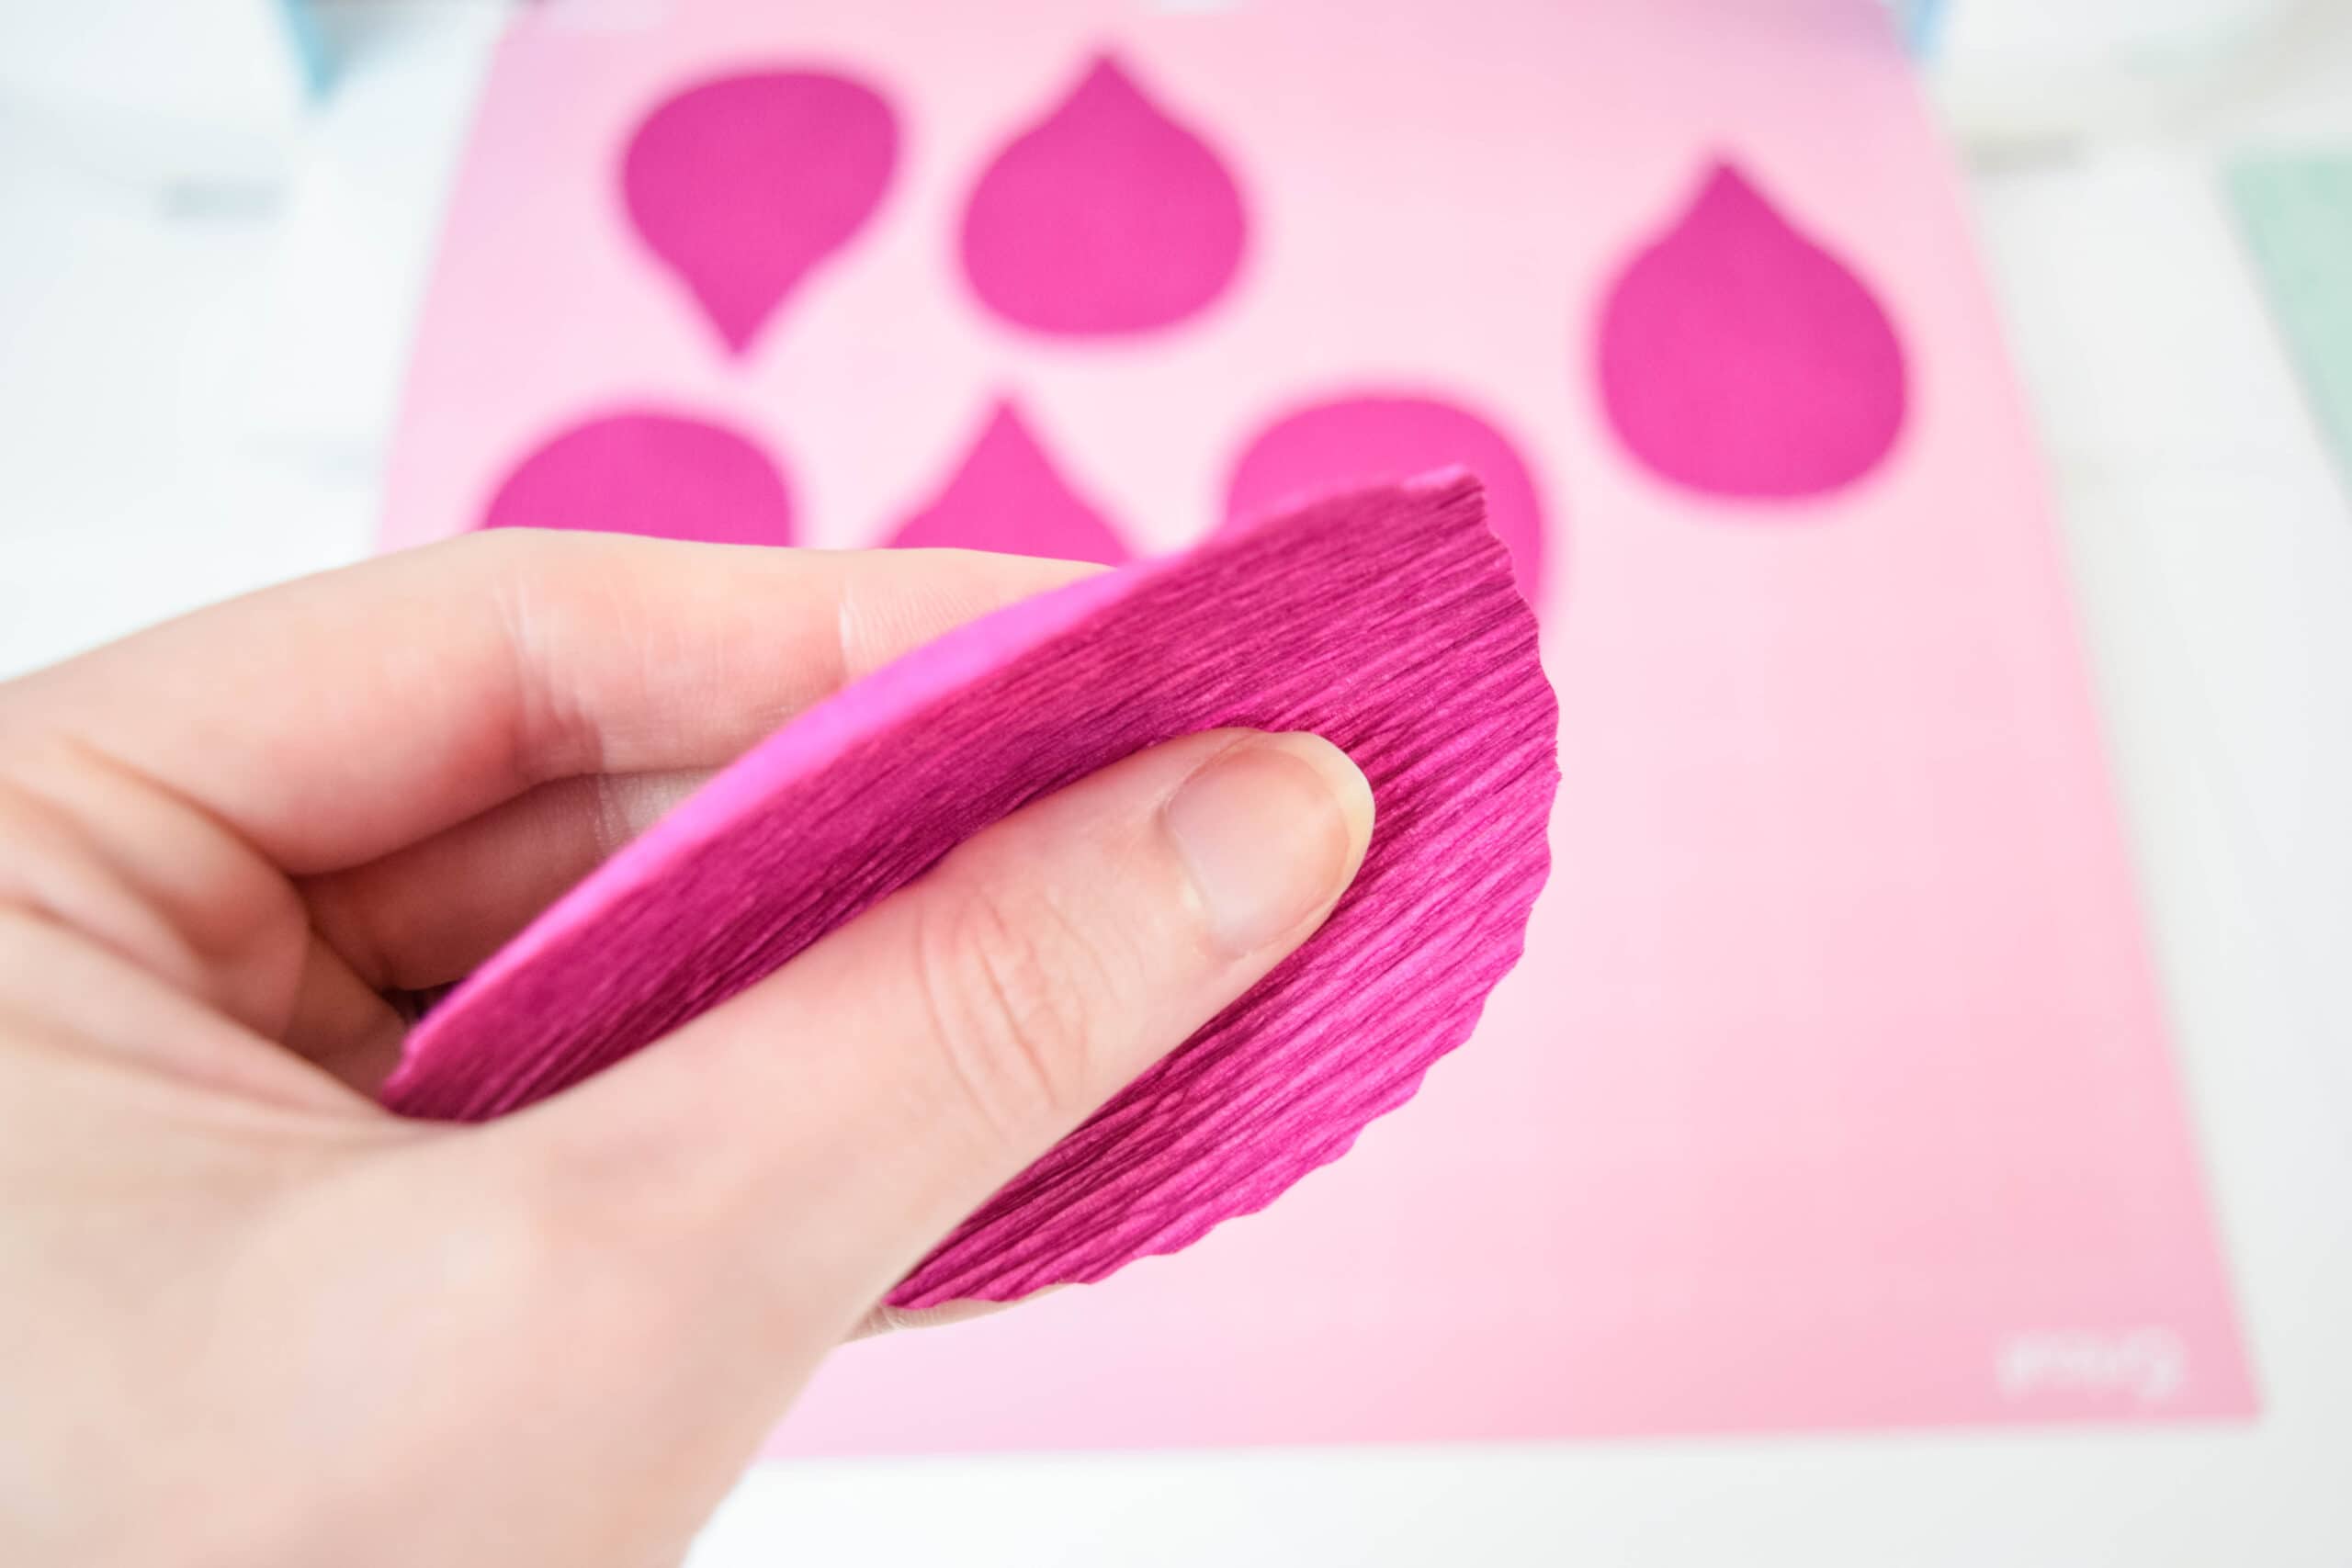 A woman rolls pink crepe paper flower petals between her thumb and pointer finger, gently curling and stretching the flower petal.